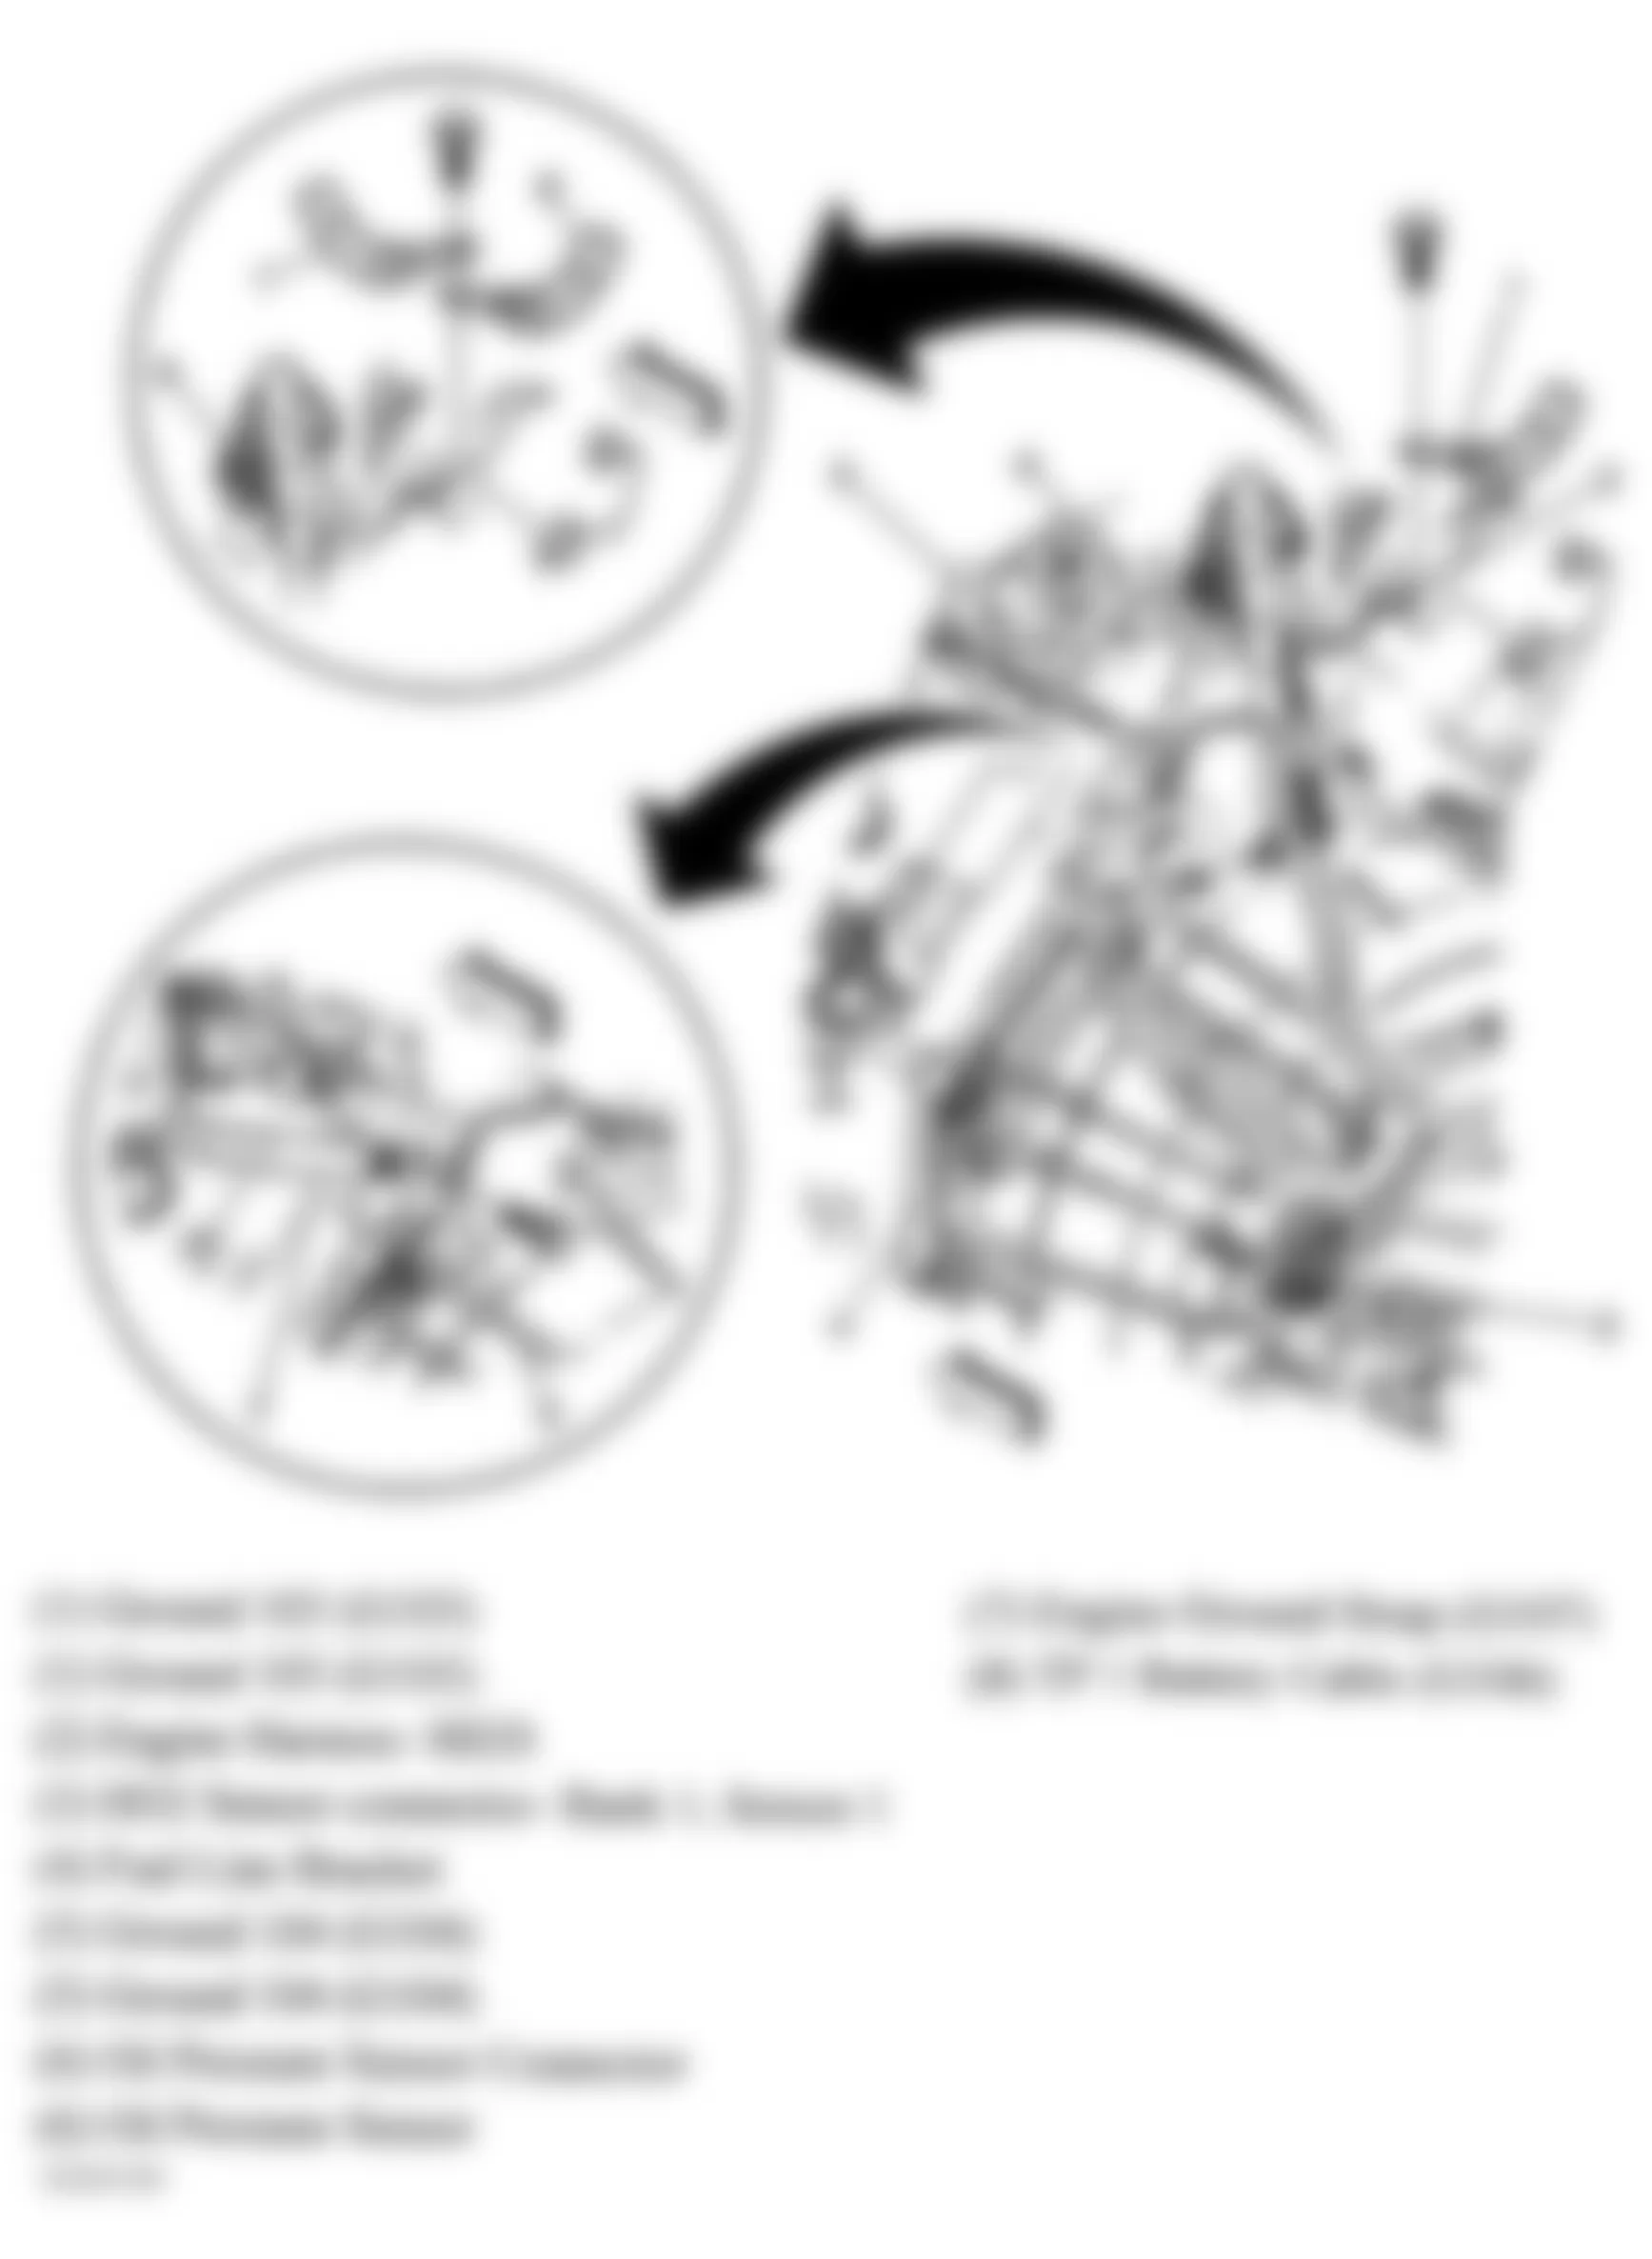 Chevrolet Avalanche 1500 2006 - Component Locations -  Rear Of Engine (4.8L, 5.3L & 6.0L)